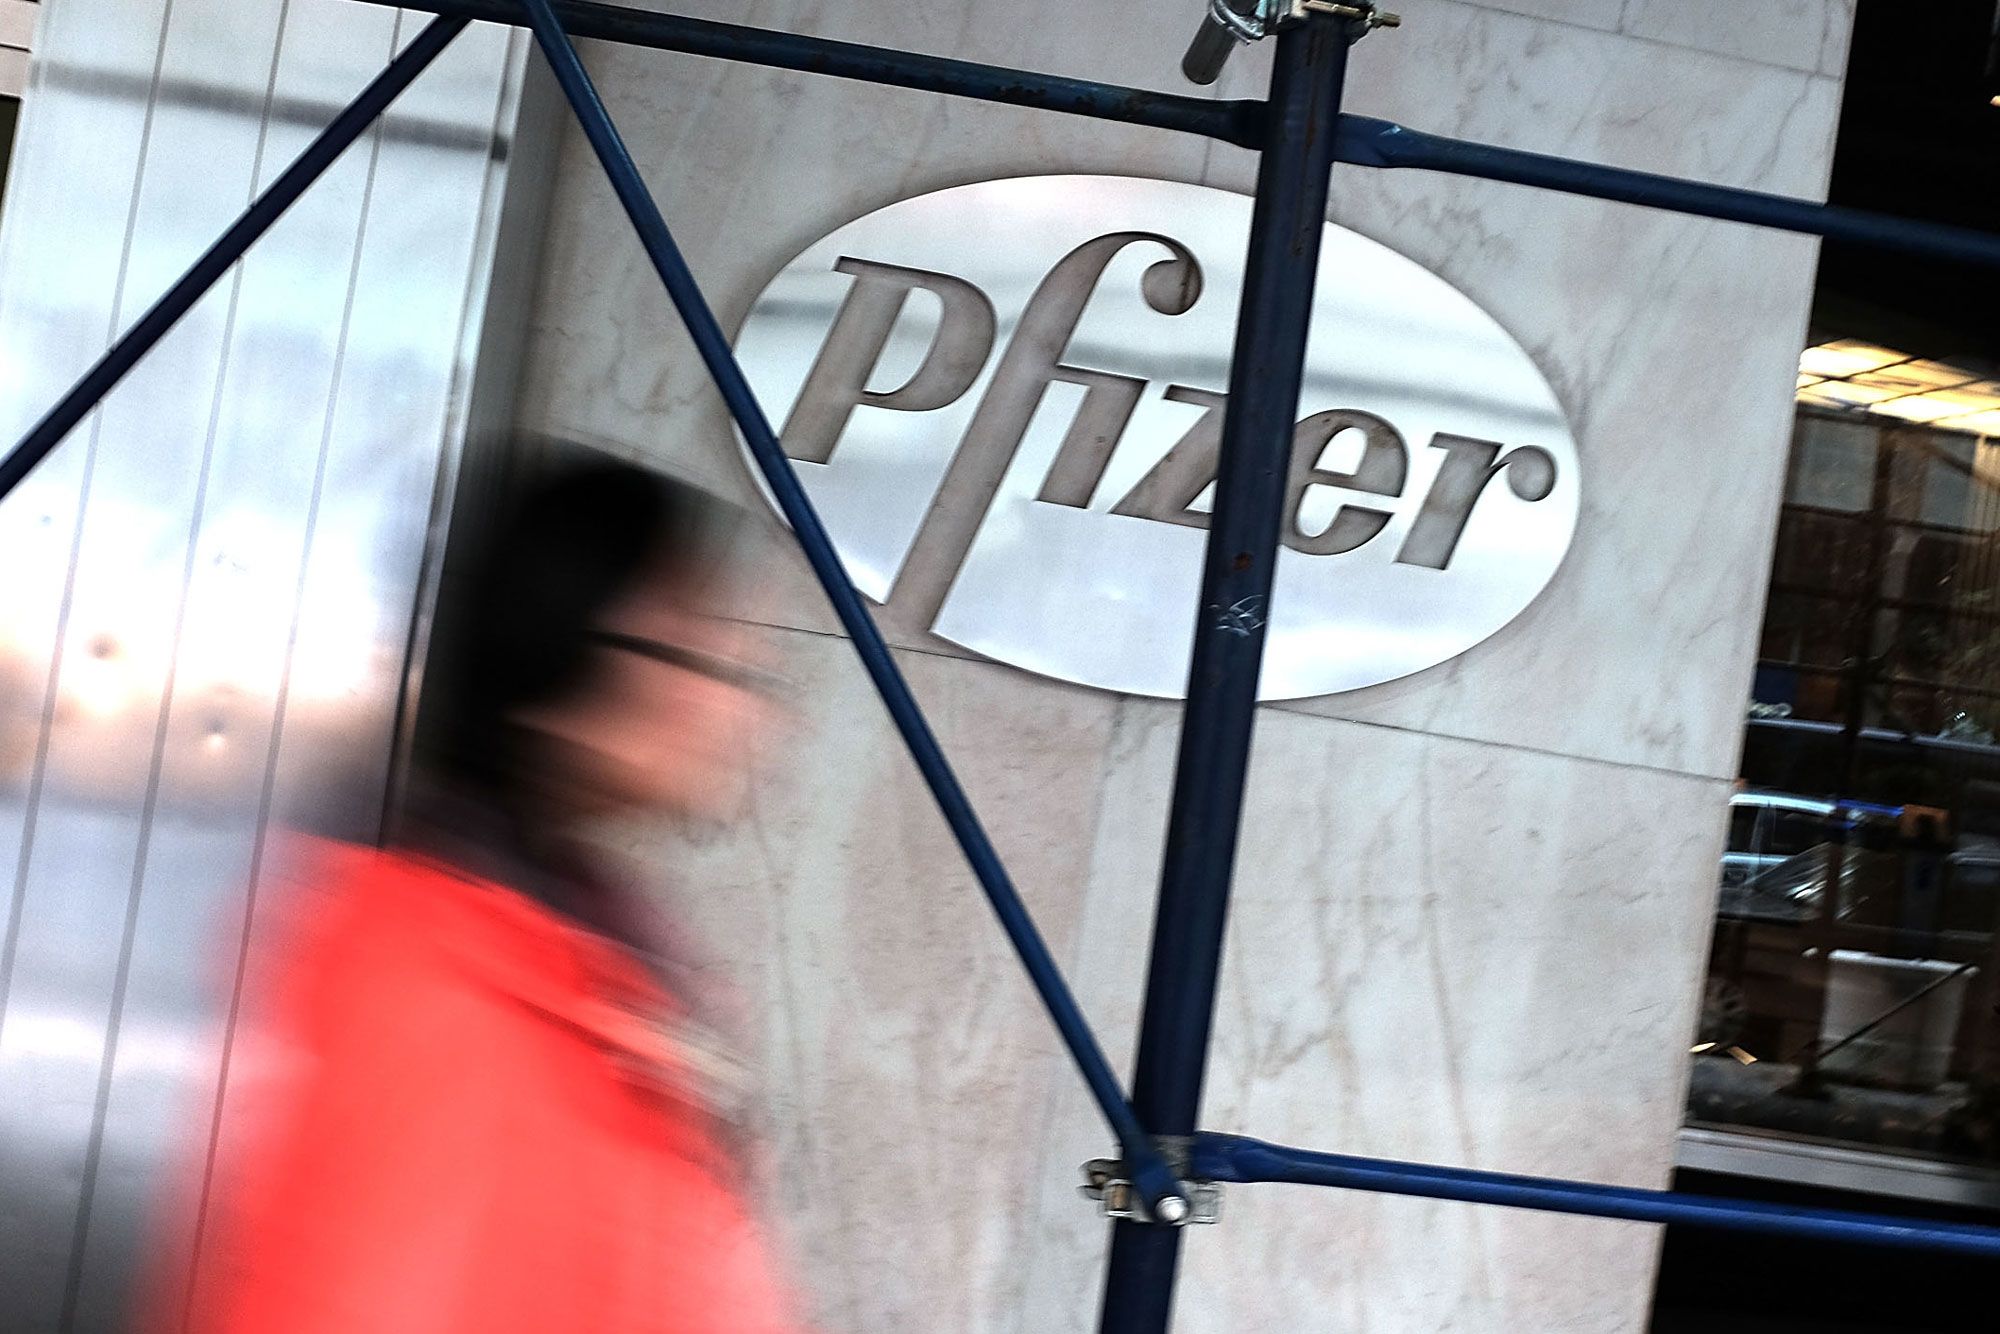 Pfizer to buy Array Biopharma for $48 a share in cash